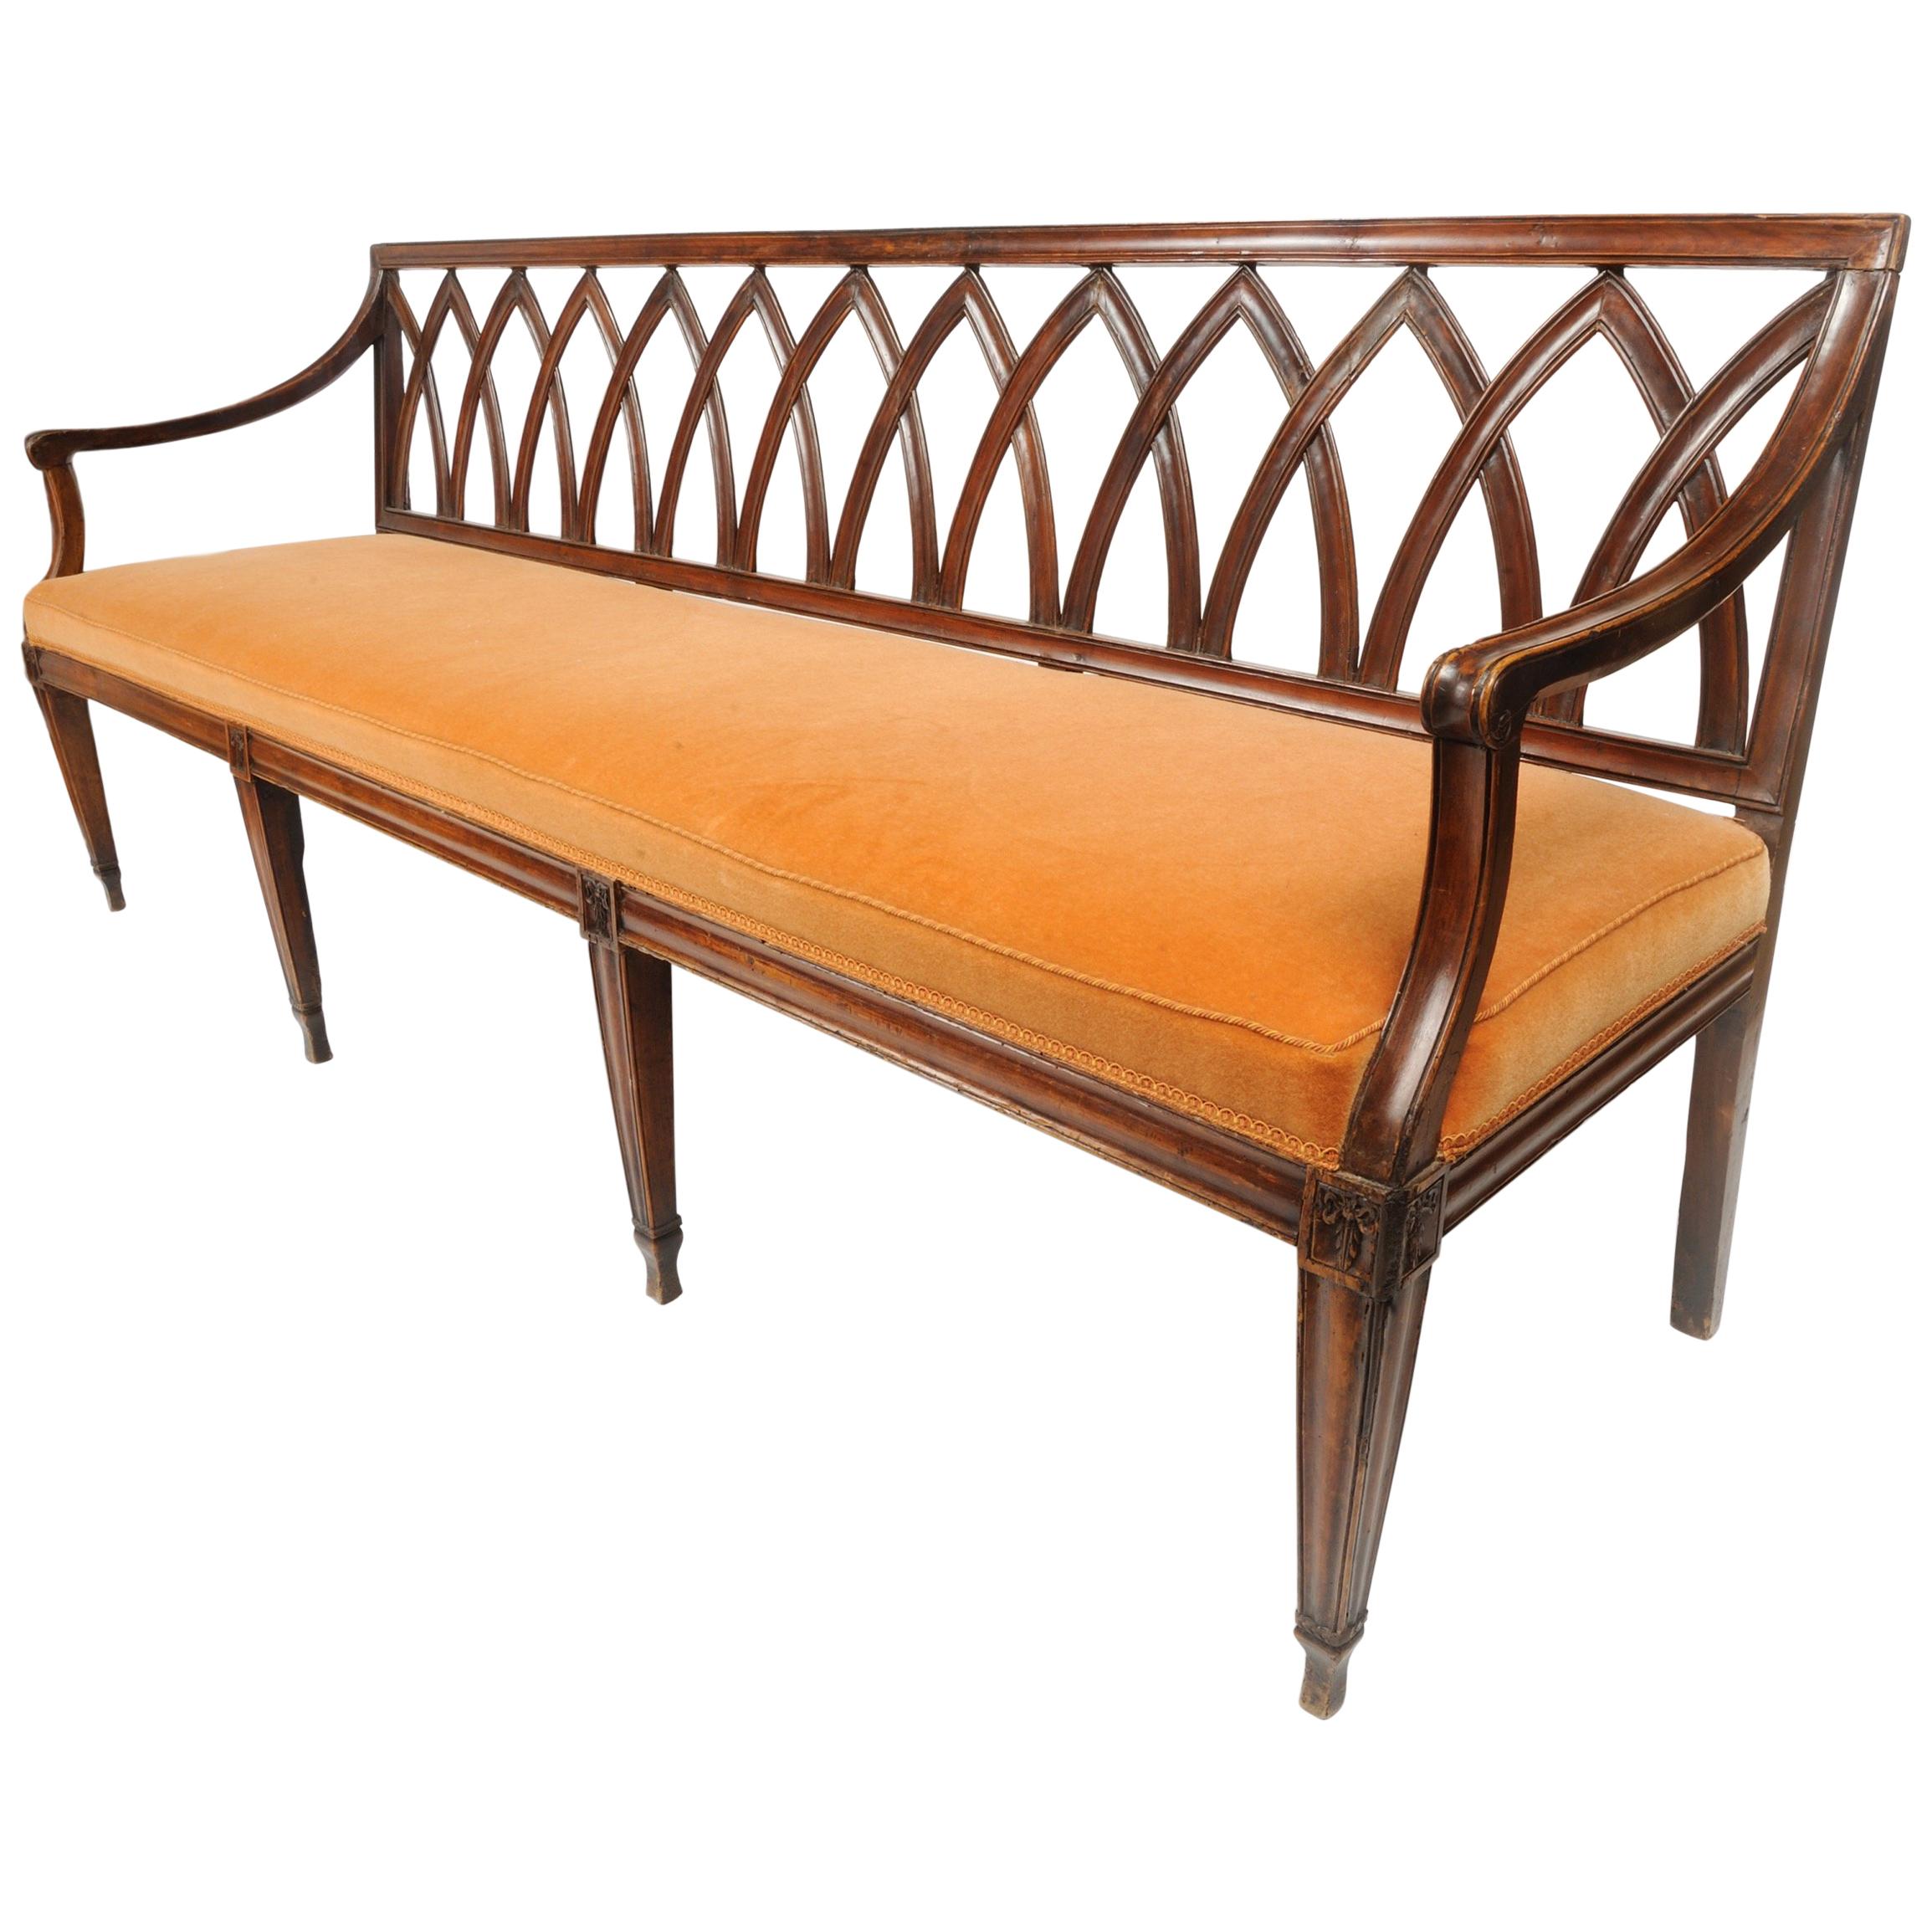 19th Century French Directoire Bench